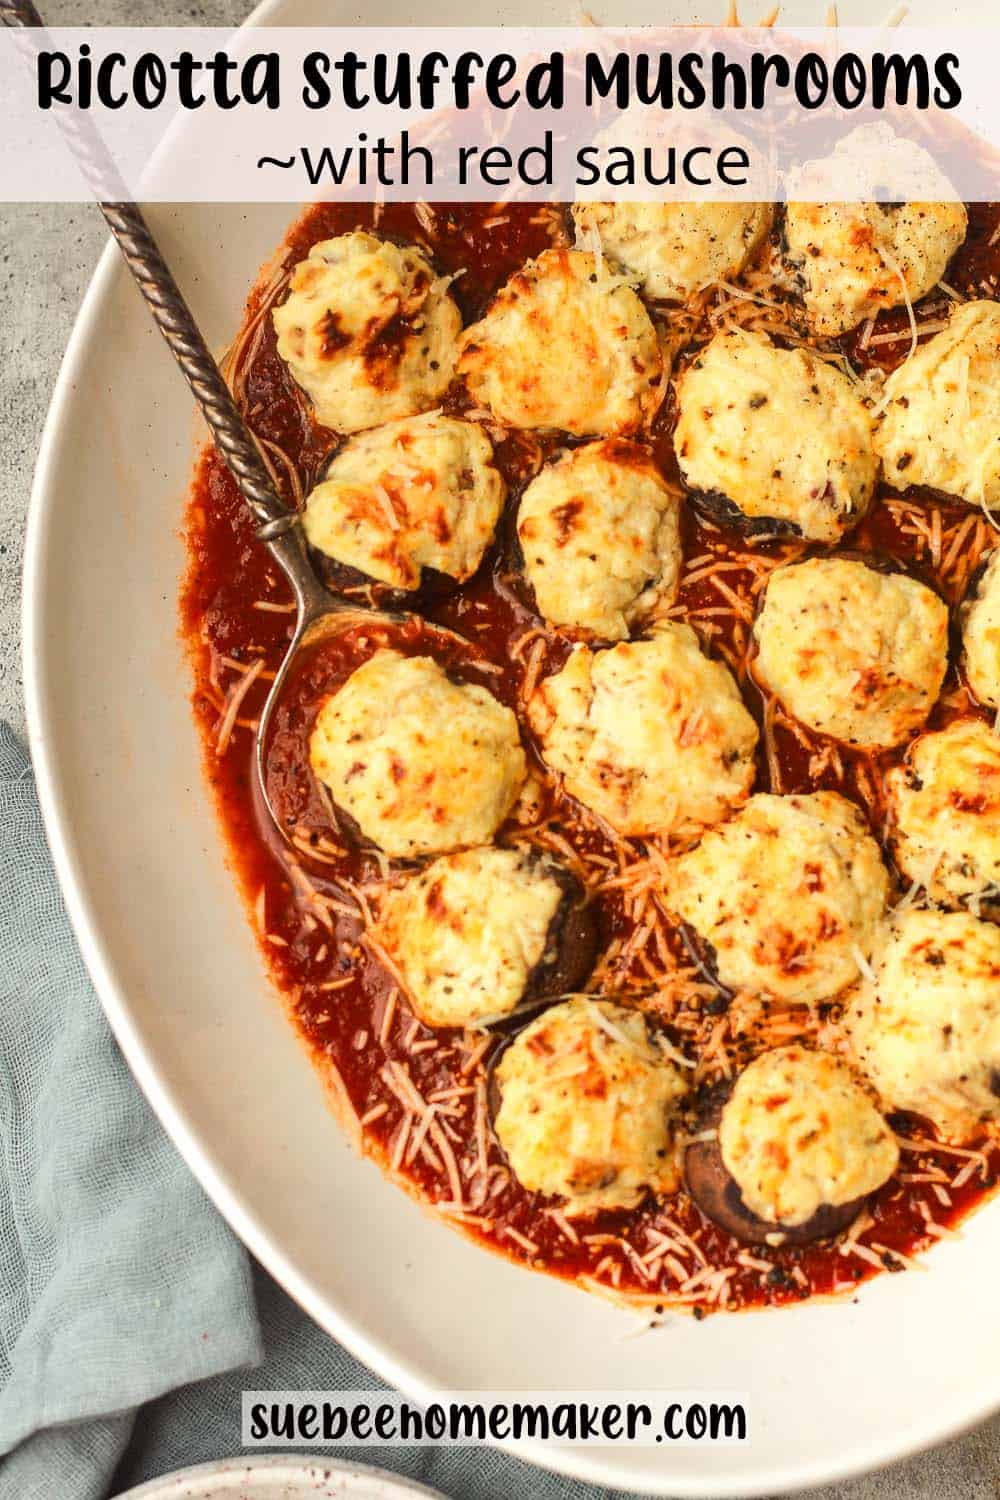 Overhead view of a platter of ricotta stuffed mushrooms over red sauce